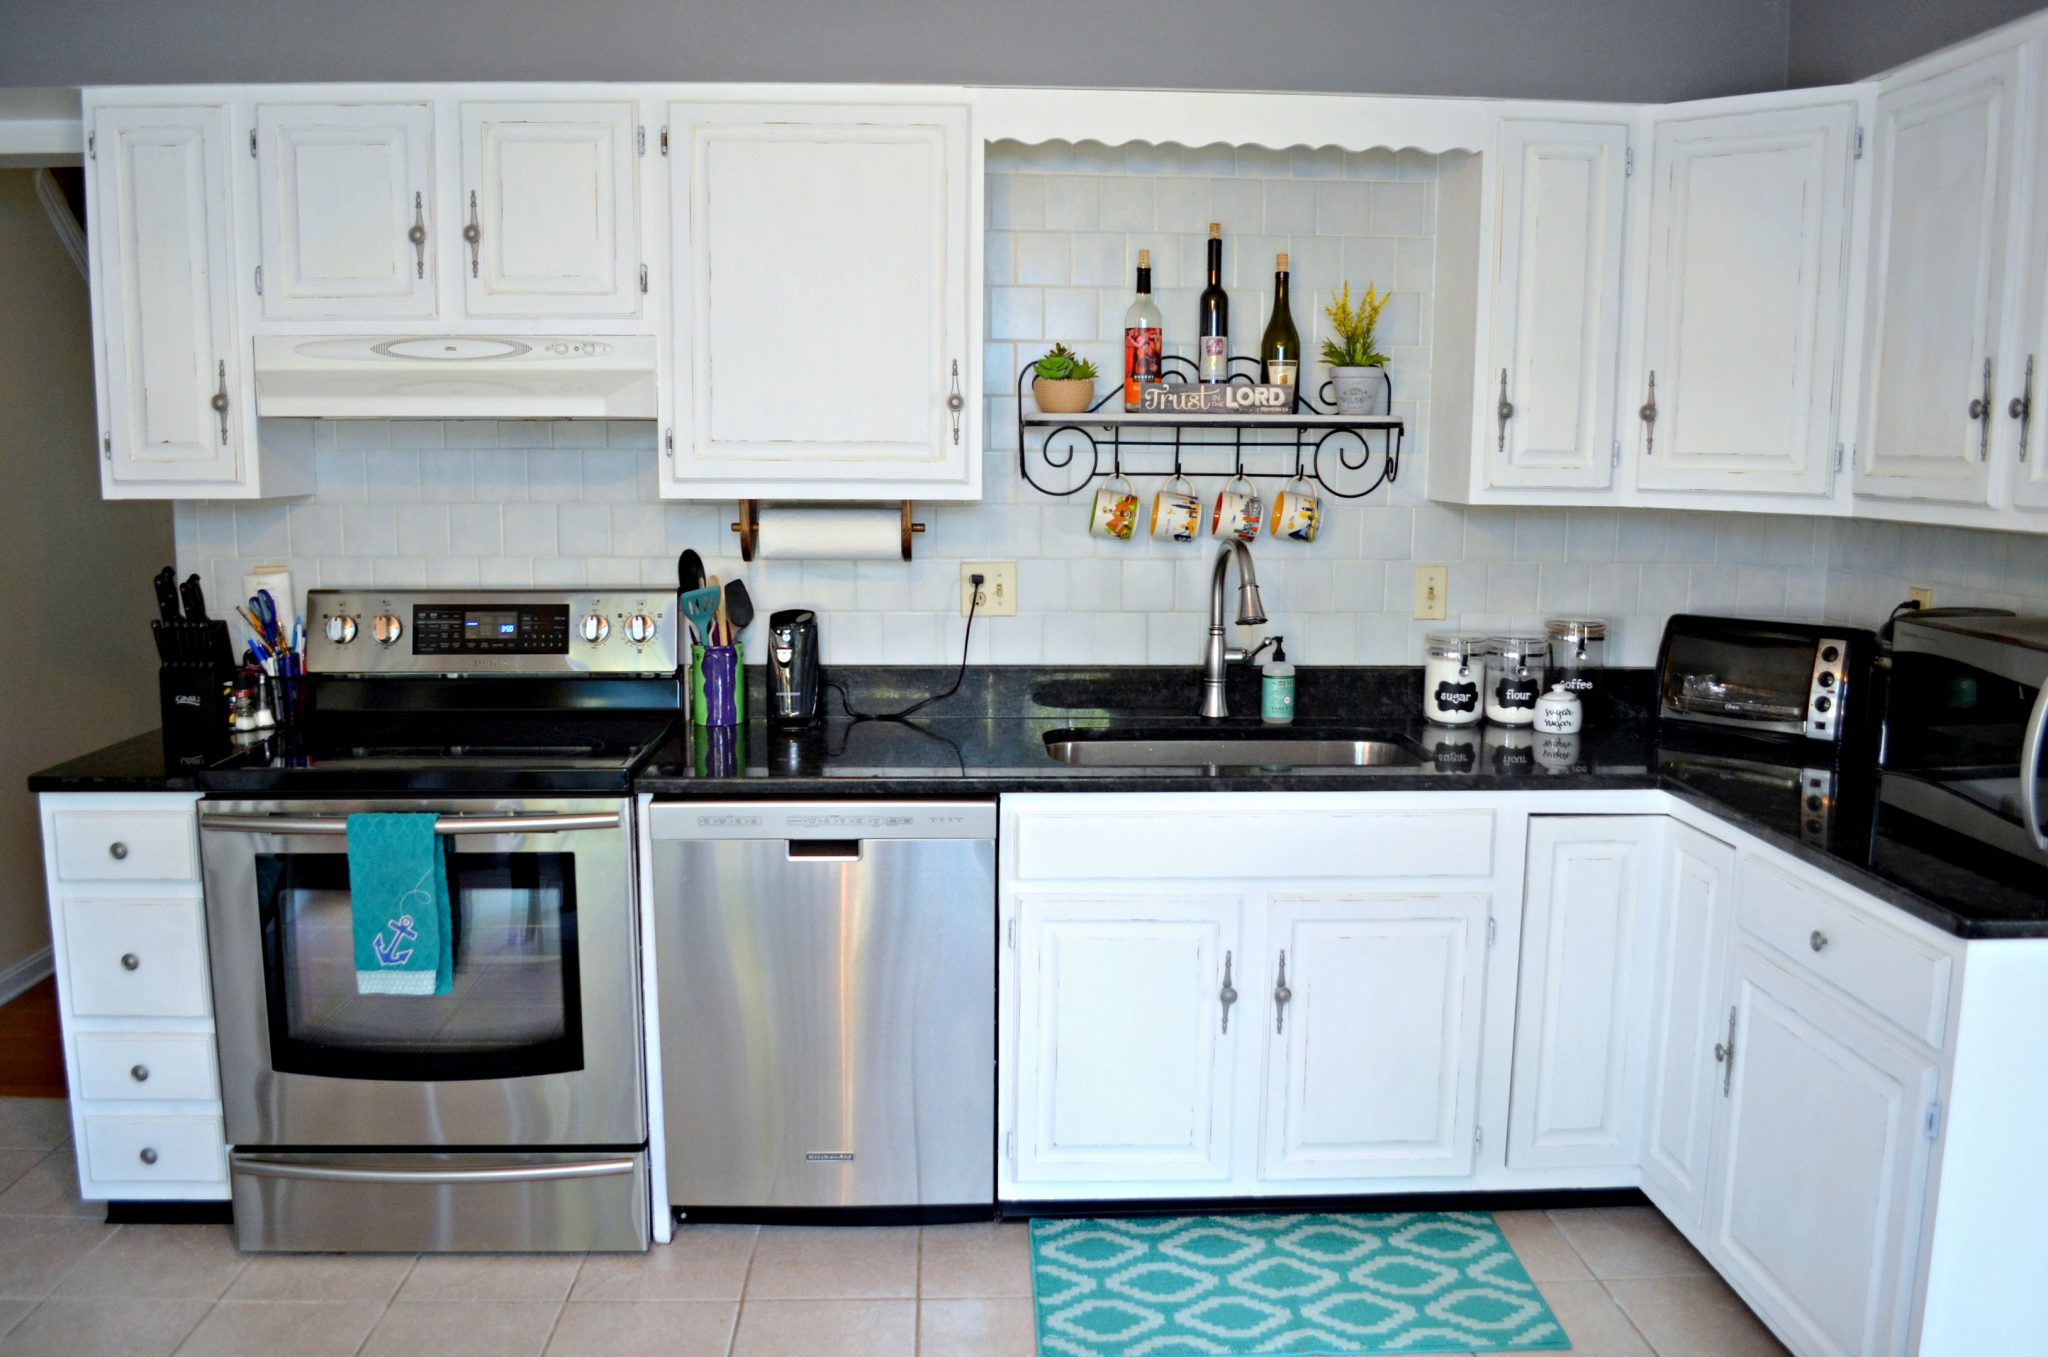 Kitchen Makeover: Painting the Cabinets